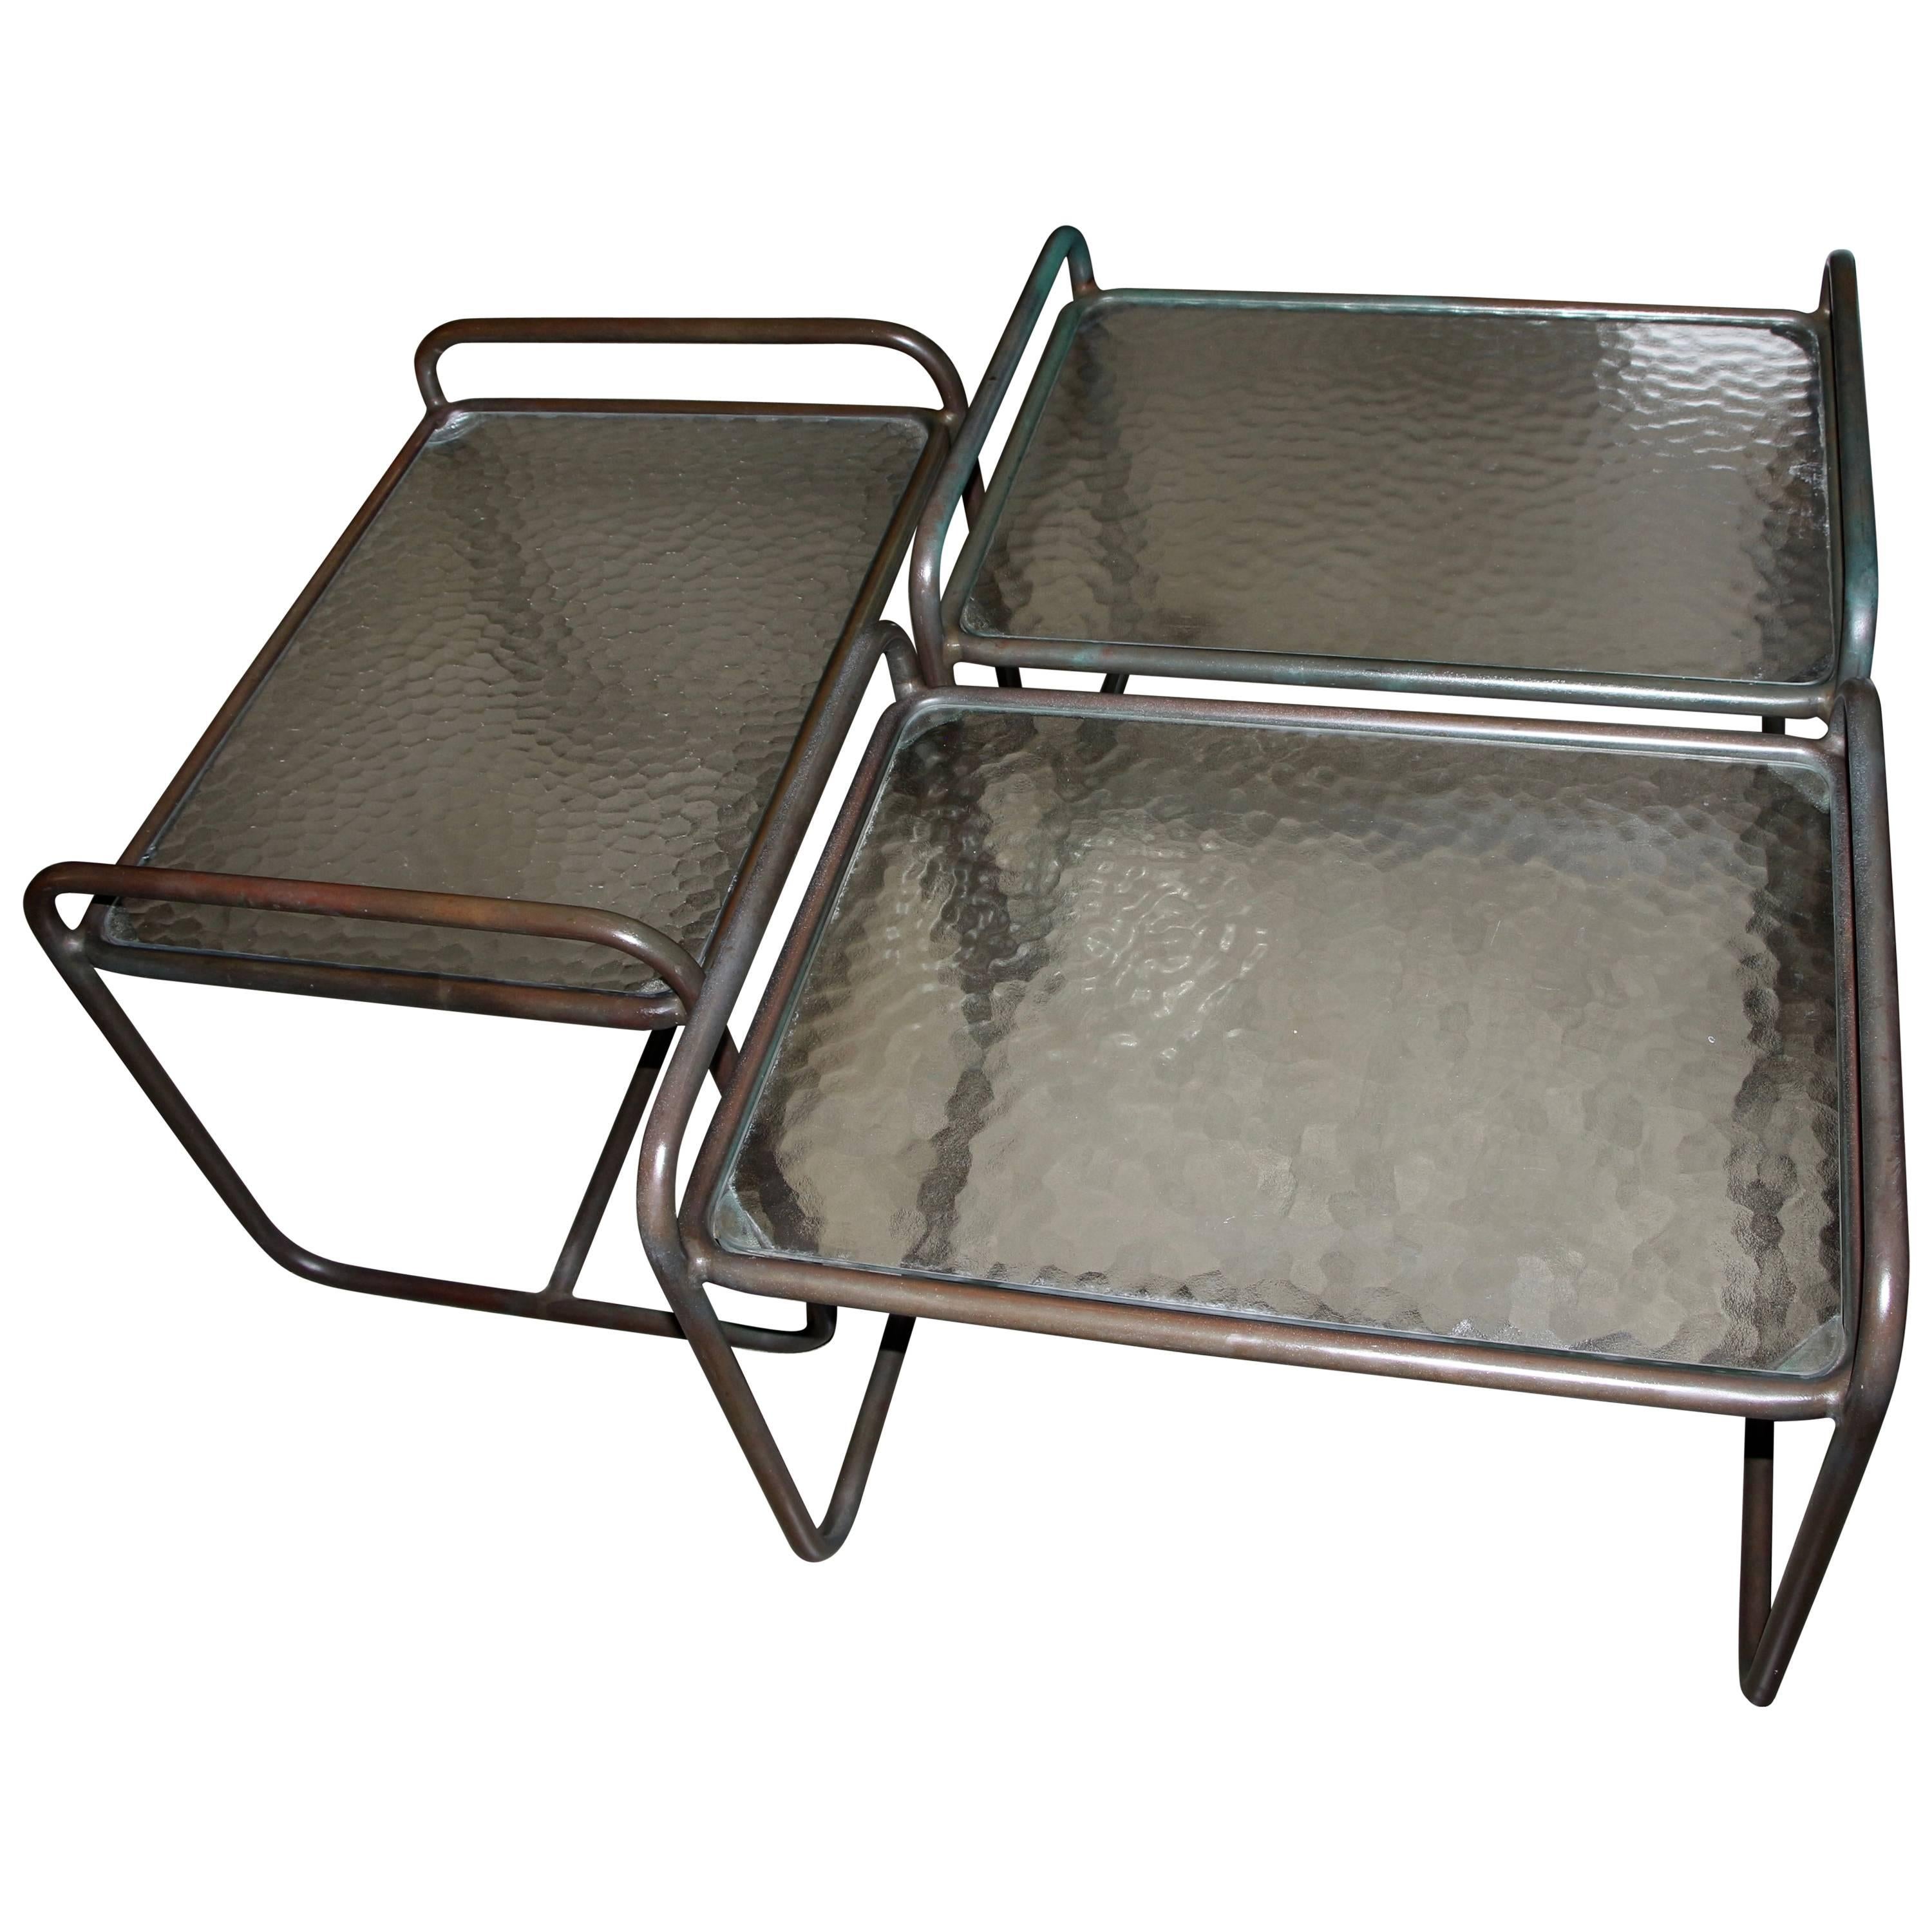 Three Tubular Bronze and Glass Side Table by Walter Lamb for Brown Jordan